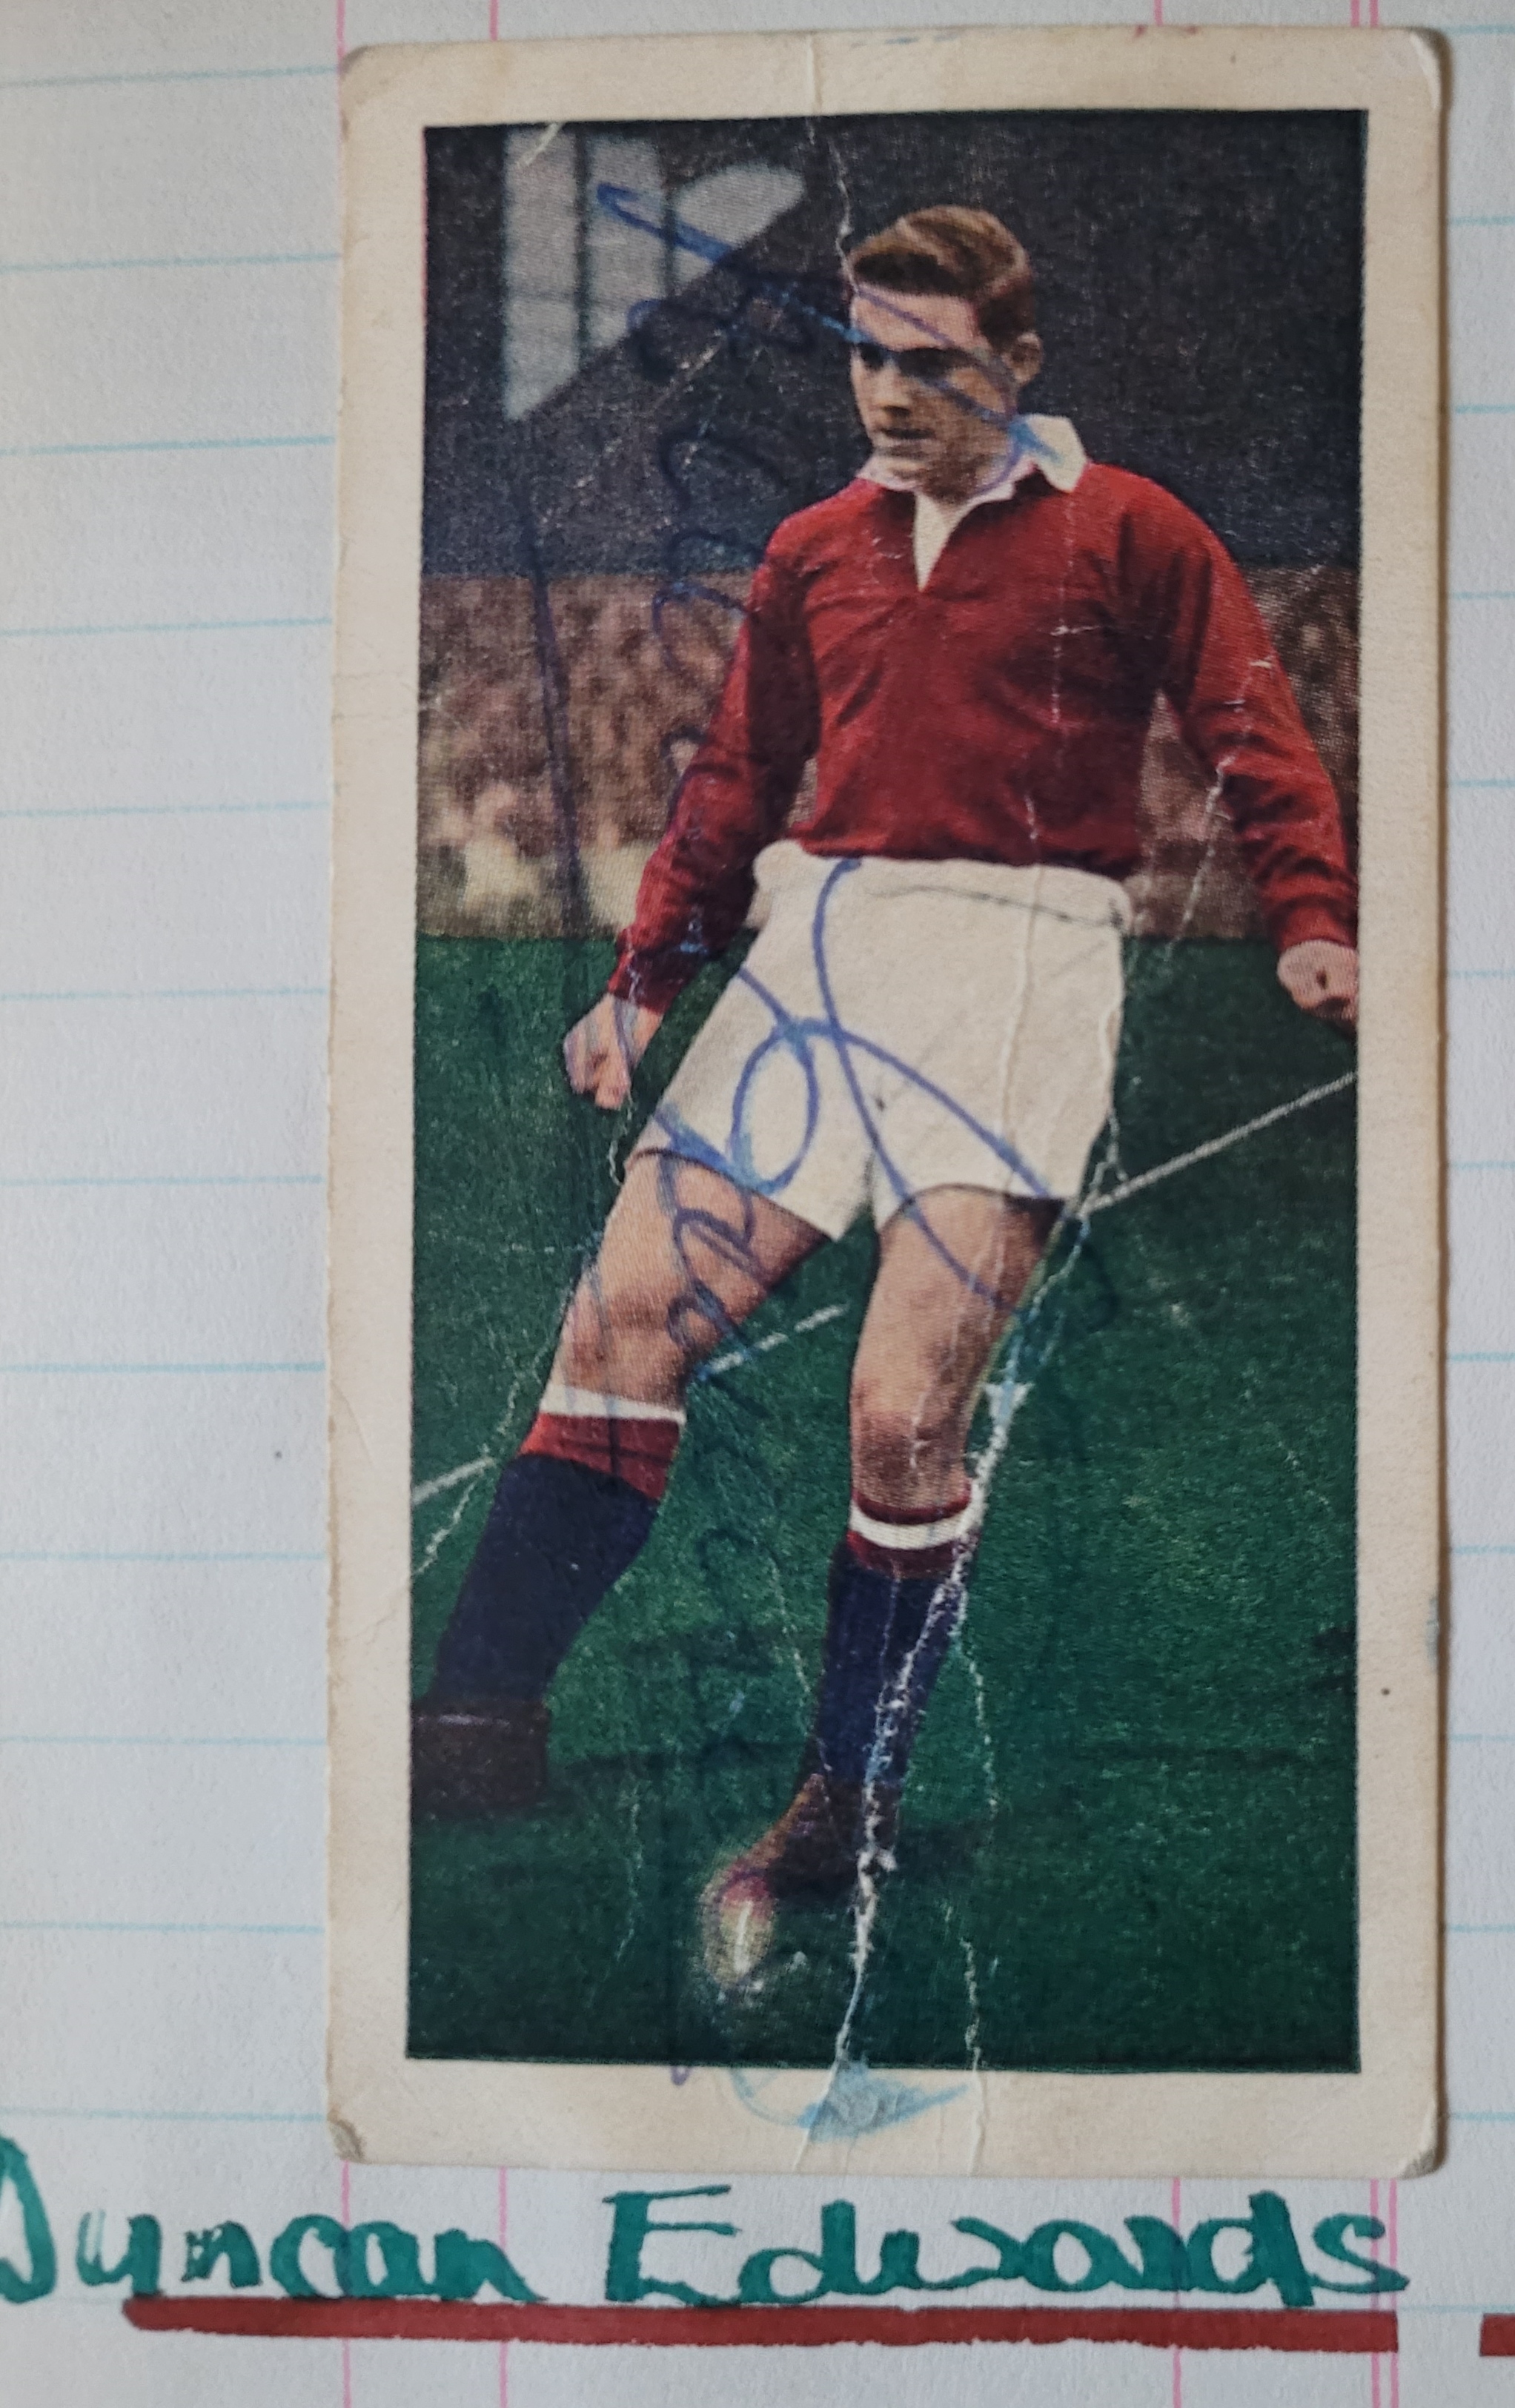 BOOK CONTAINING OVER 1,300 AUTOGRAPHED PICTURES INC' 4 OF MANCHESTER UNITED'S DUNCAN EDWARDS